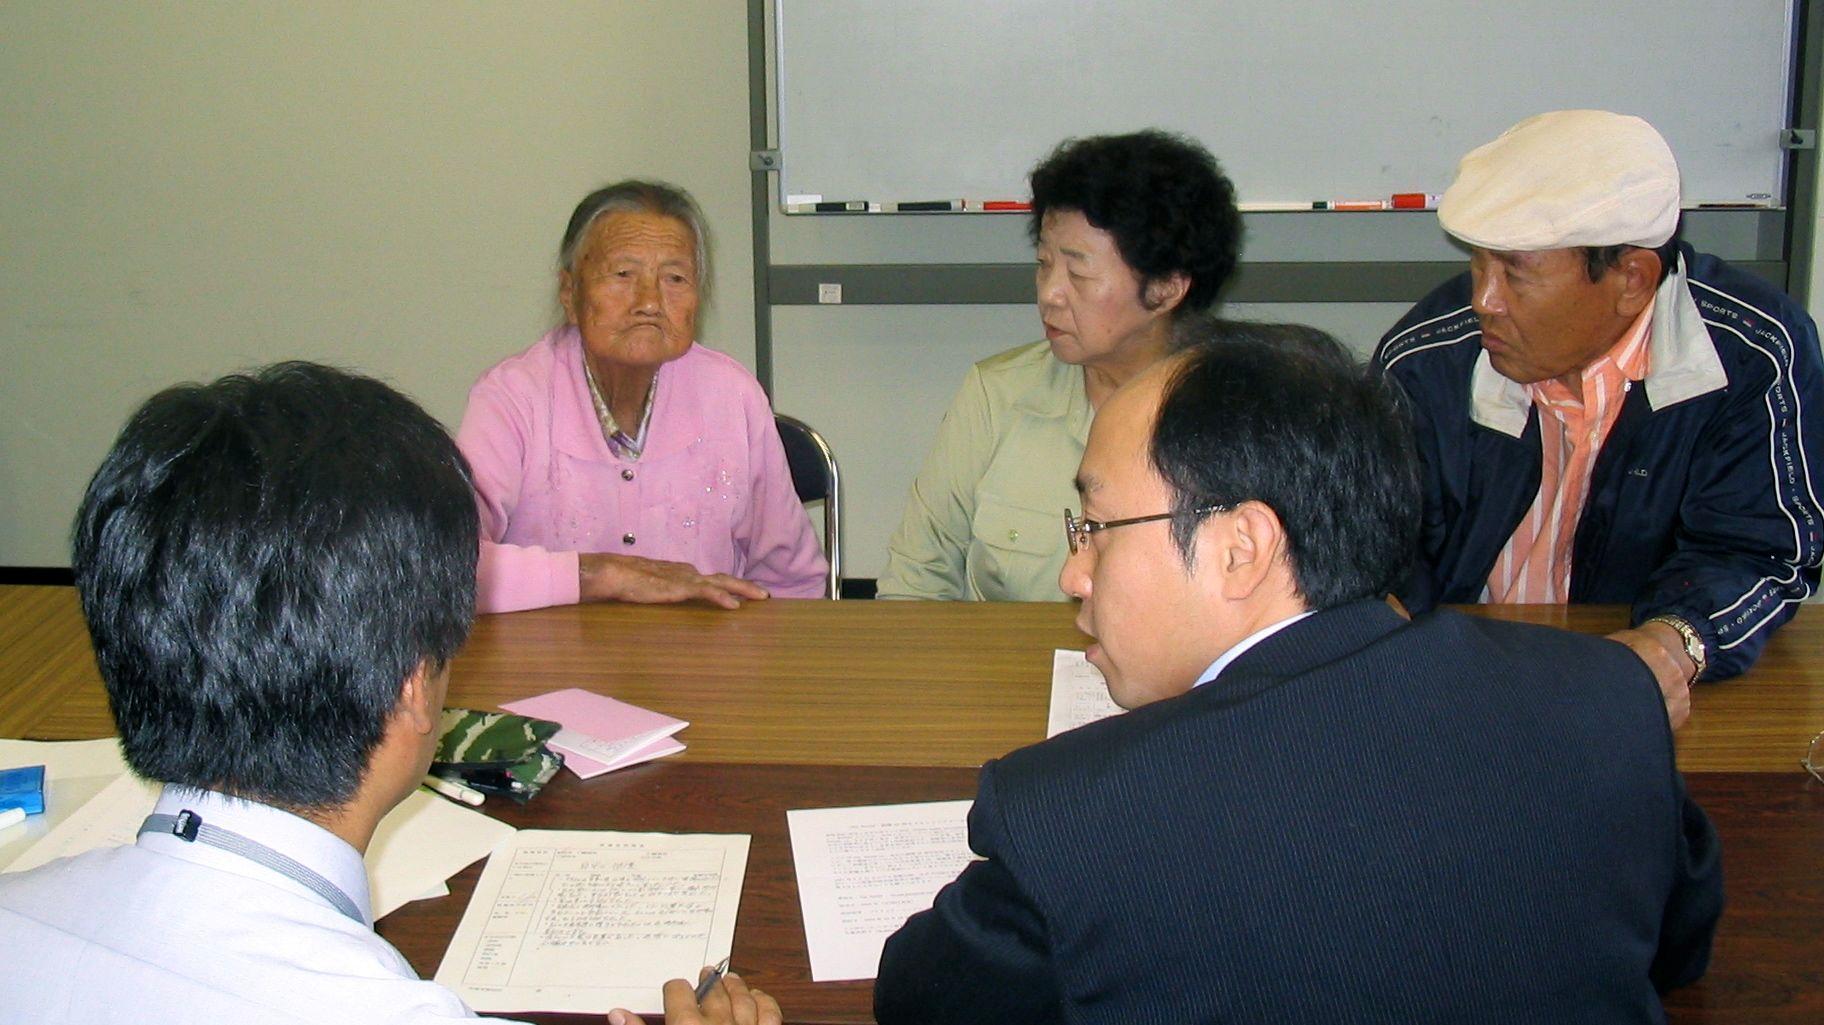 An elderly Korean woman appears with her son and daughter-in-law at a hearing in Hiroshima to determine whether she is eligible for special rights accorded to survivors of the atomic bomb.